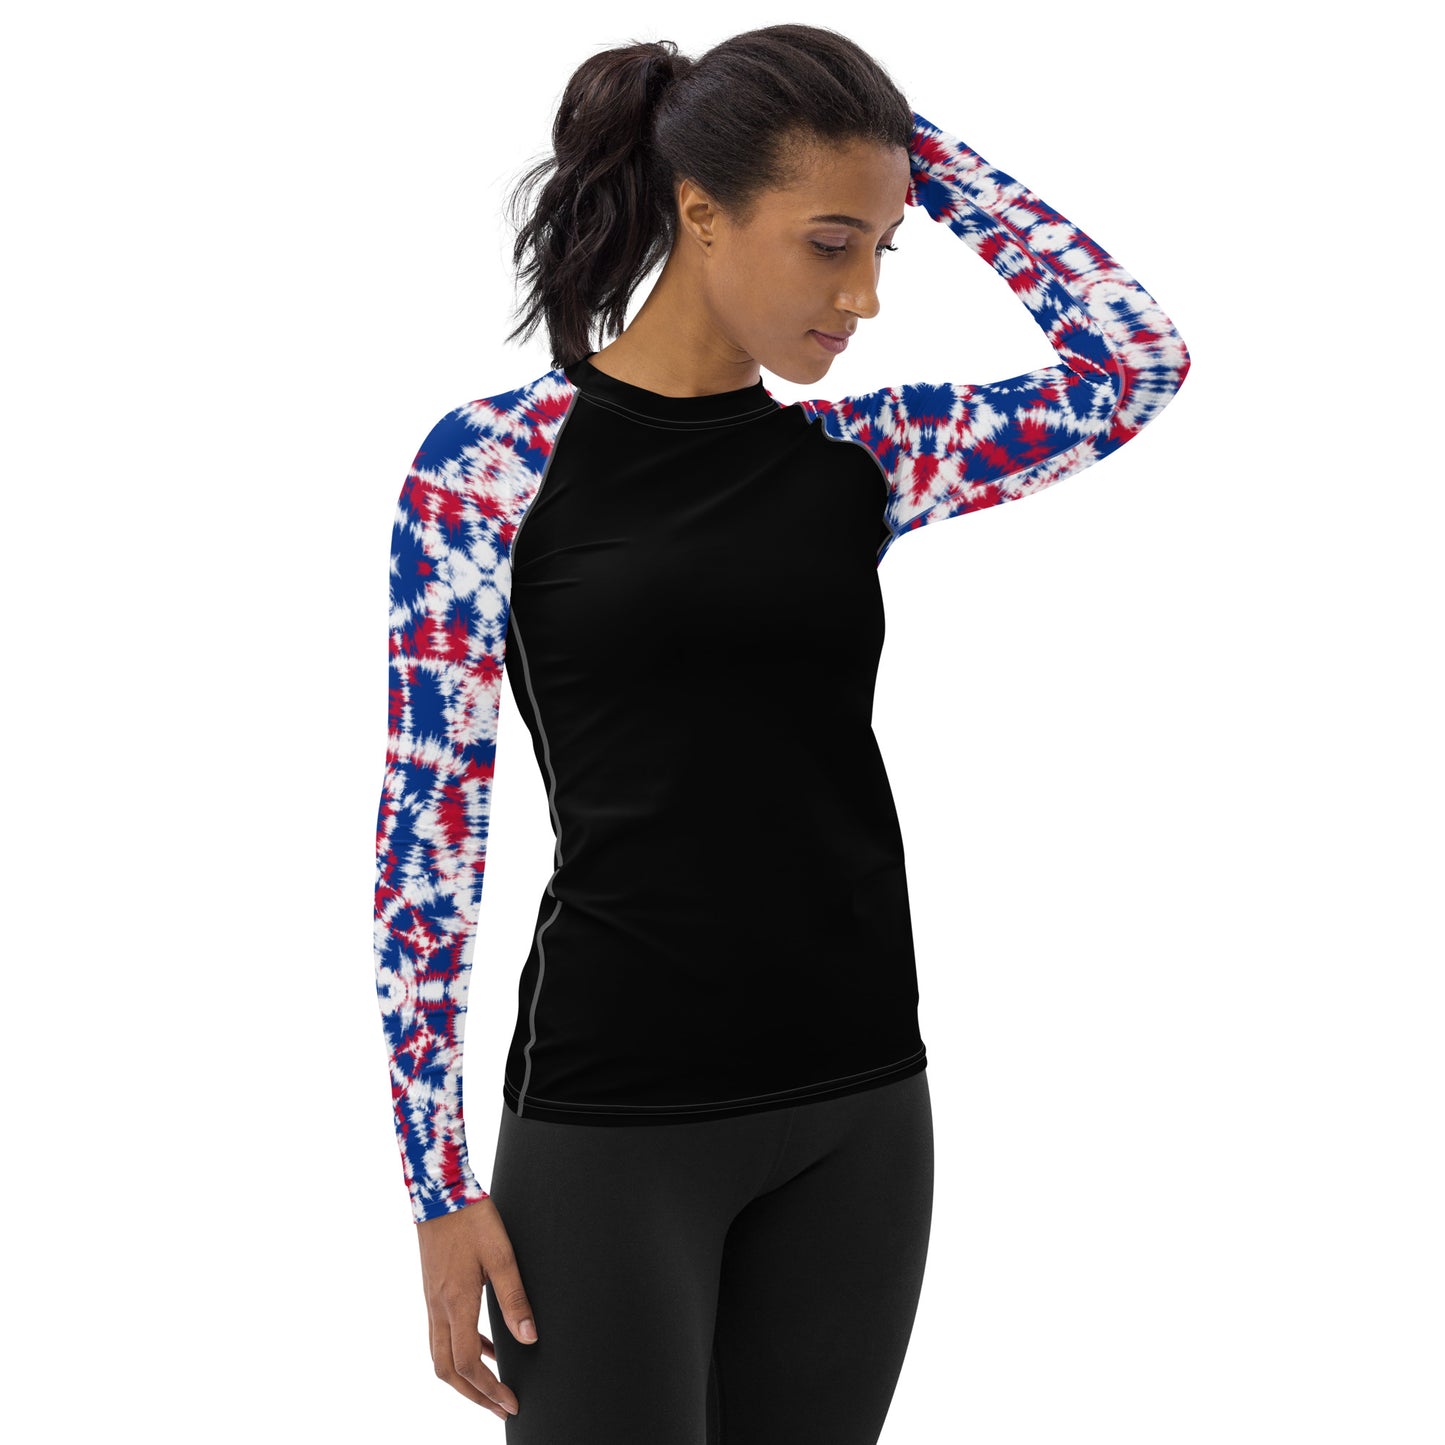 Batik - Red, White, and Blue Sleeves and Black Body - Women's Rash Guard